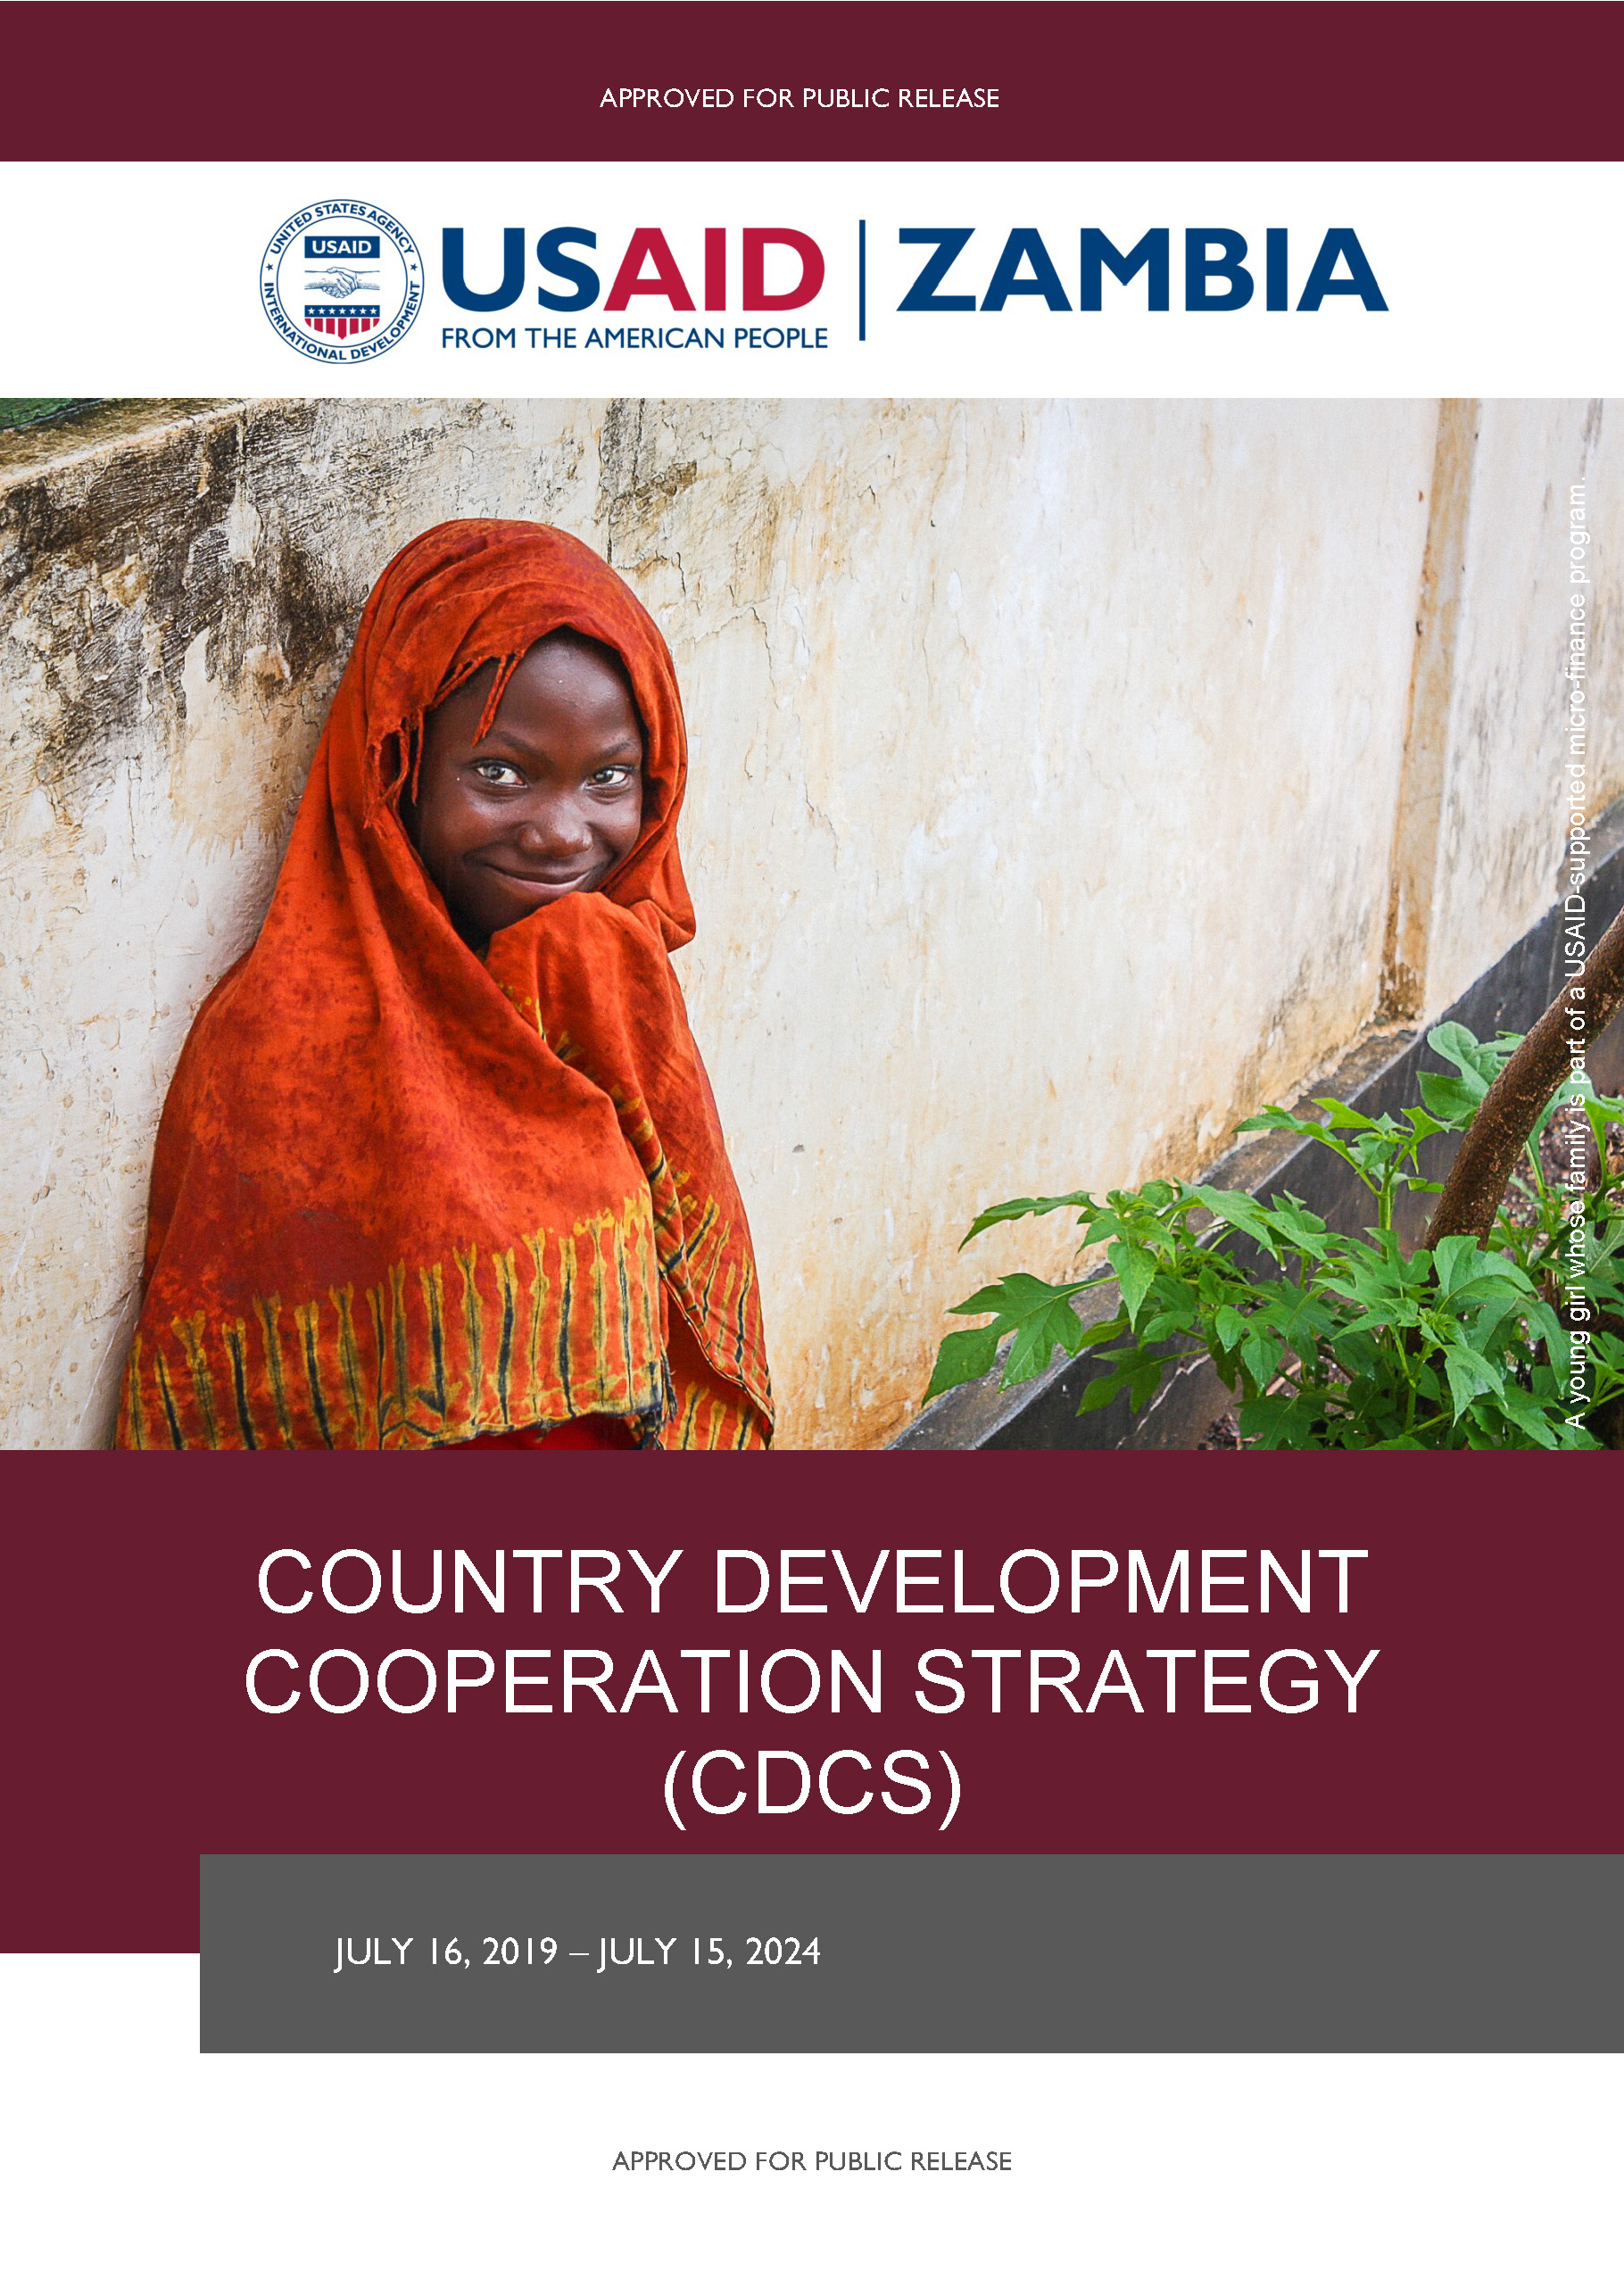 USAID/Zambia 2019-2024 Country Development Cooperation Strategy (CDCS)